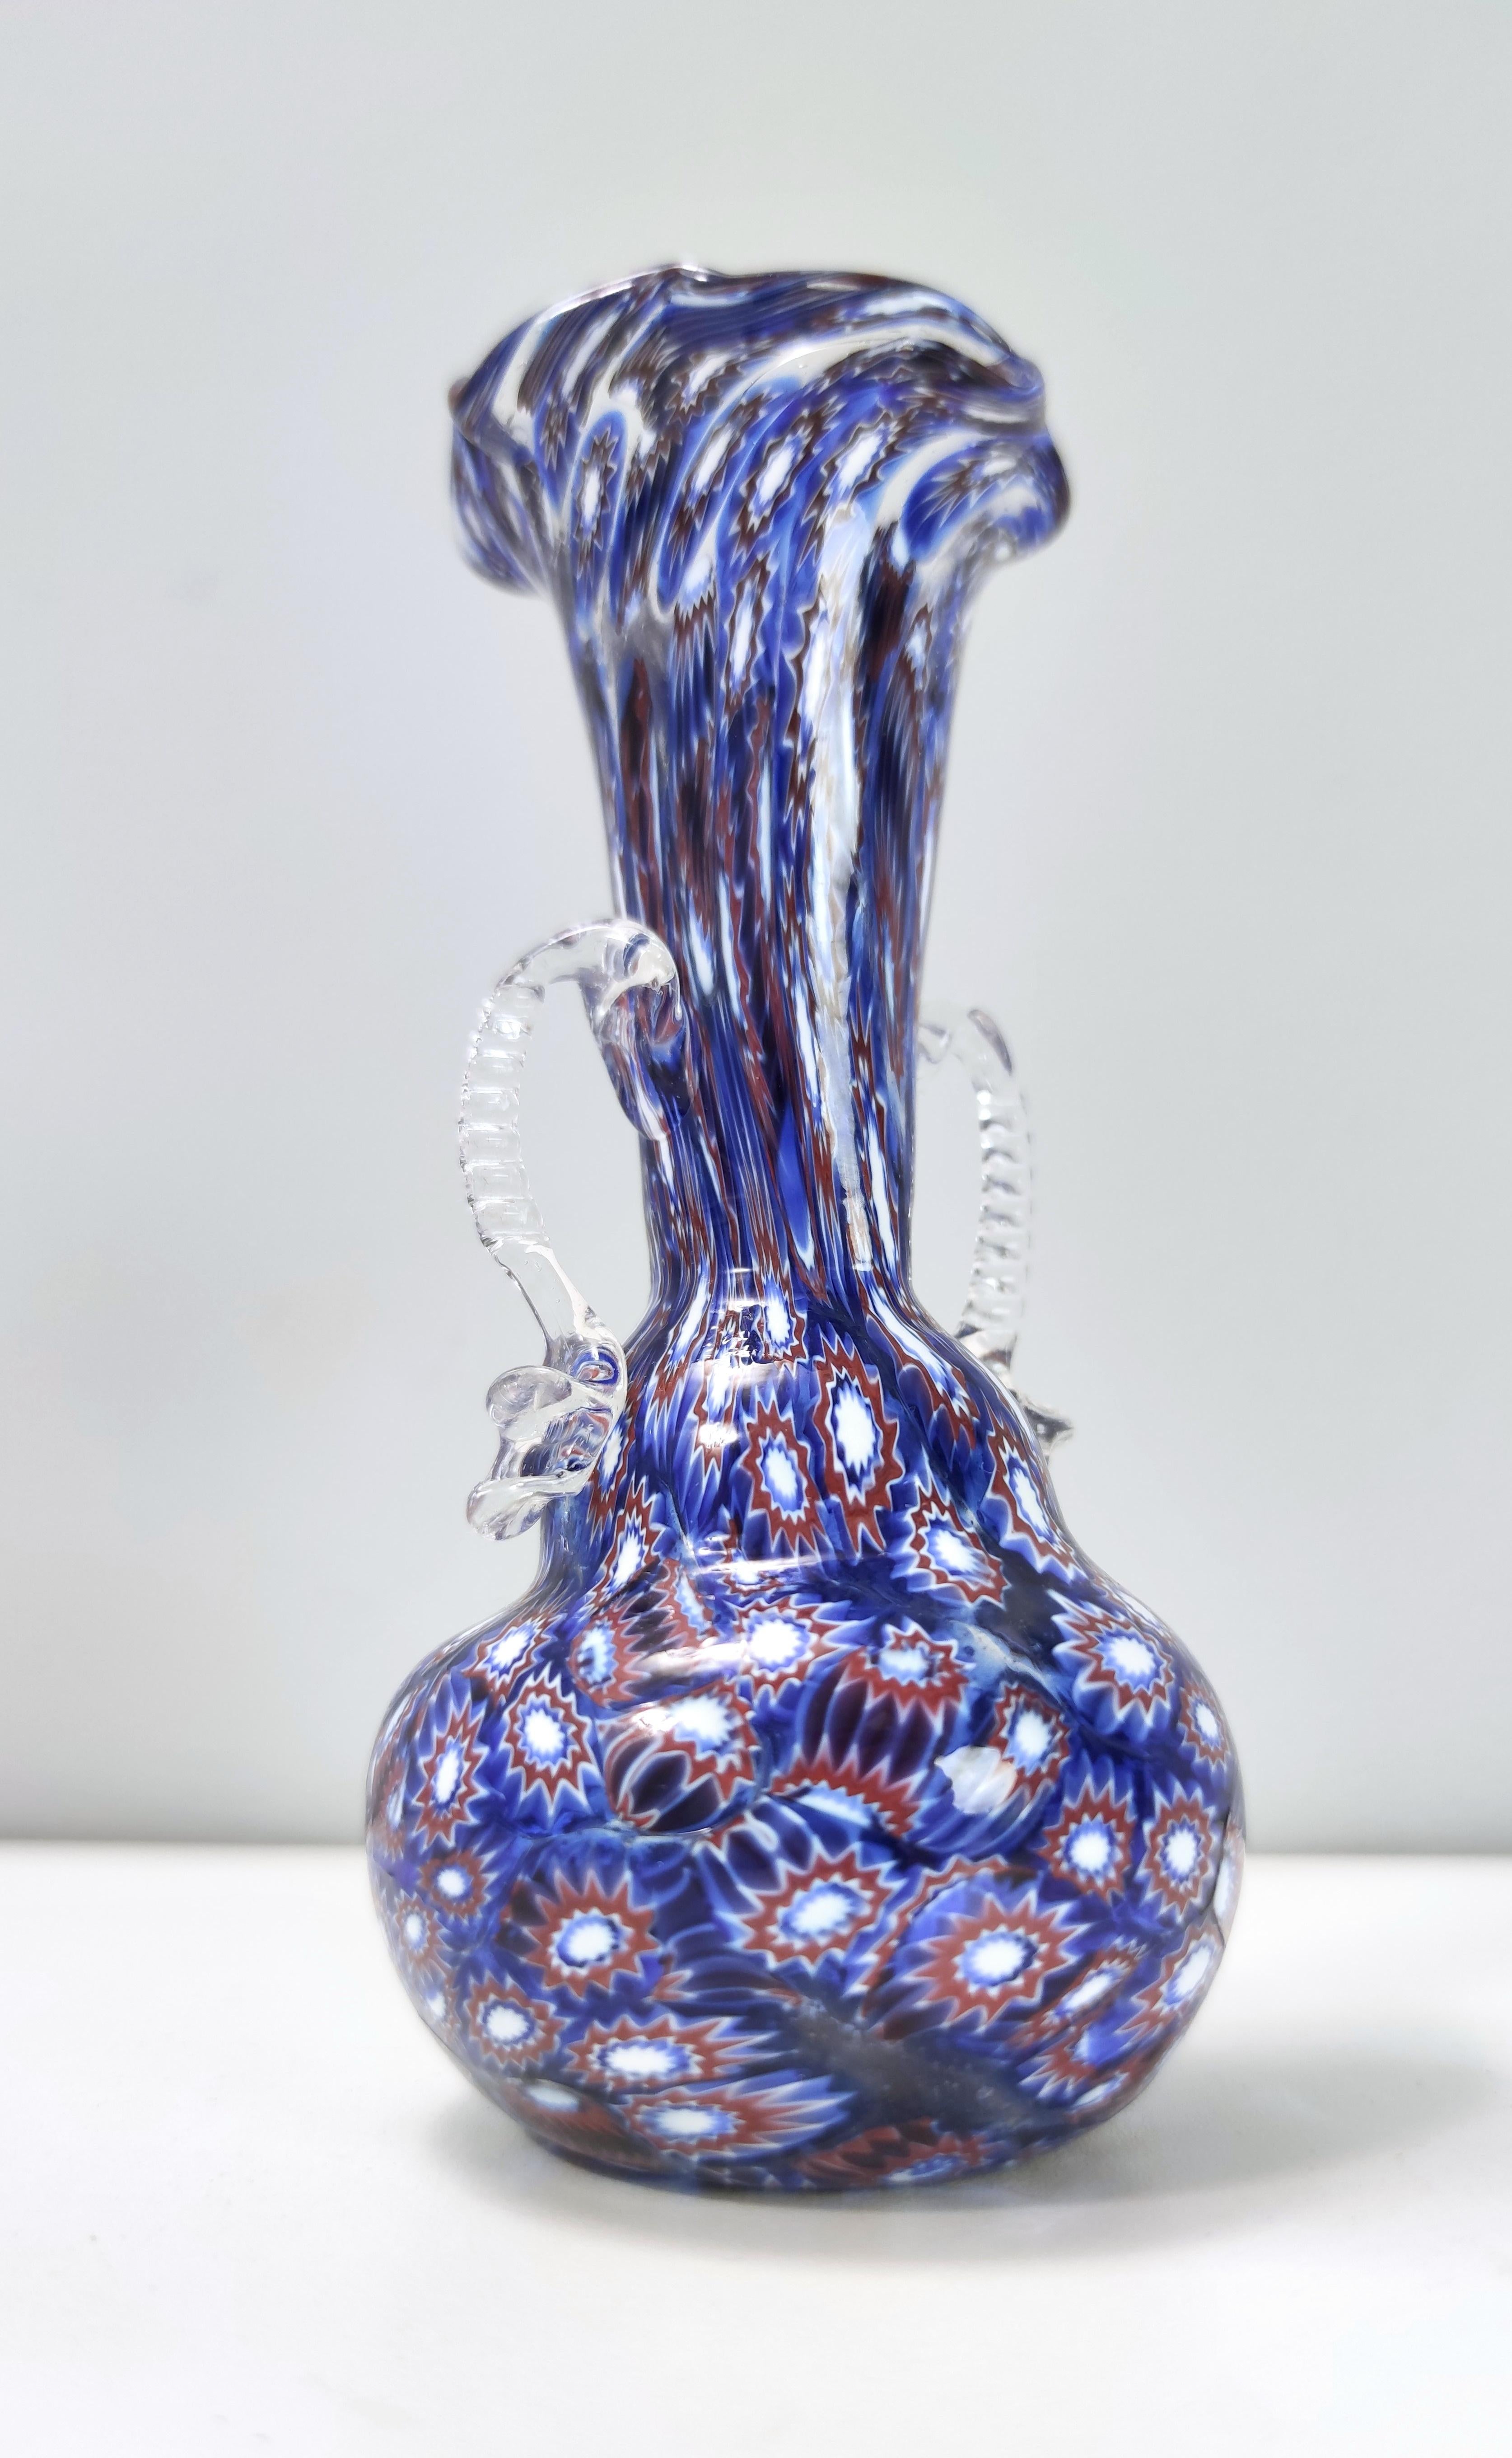 Vintage Blue Murano Glass Vase Ascribable to Fratelli Toso with Murrines, Italy For Sale 4